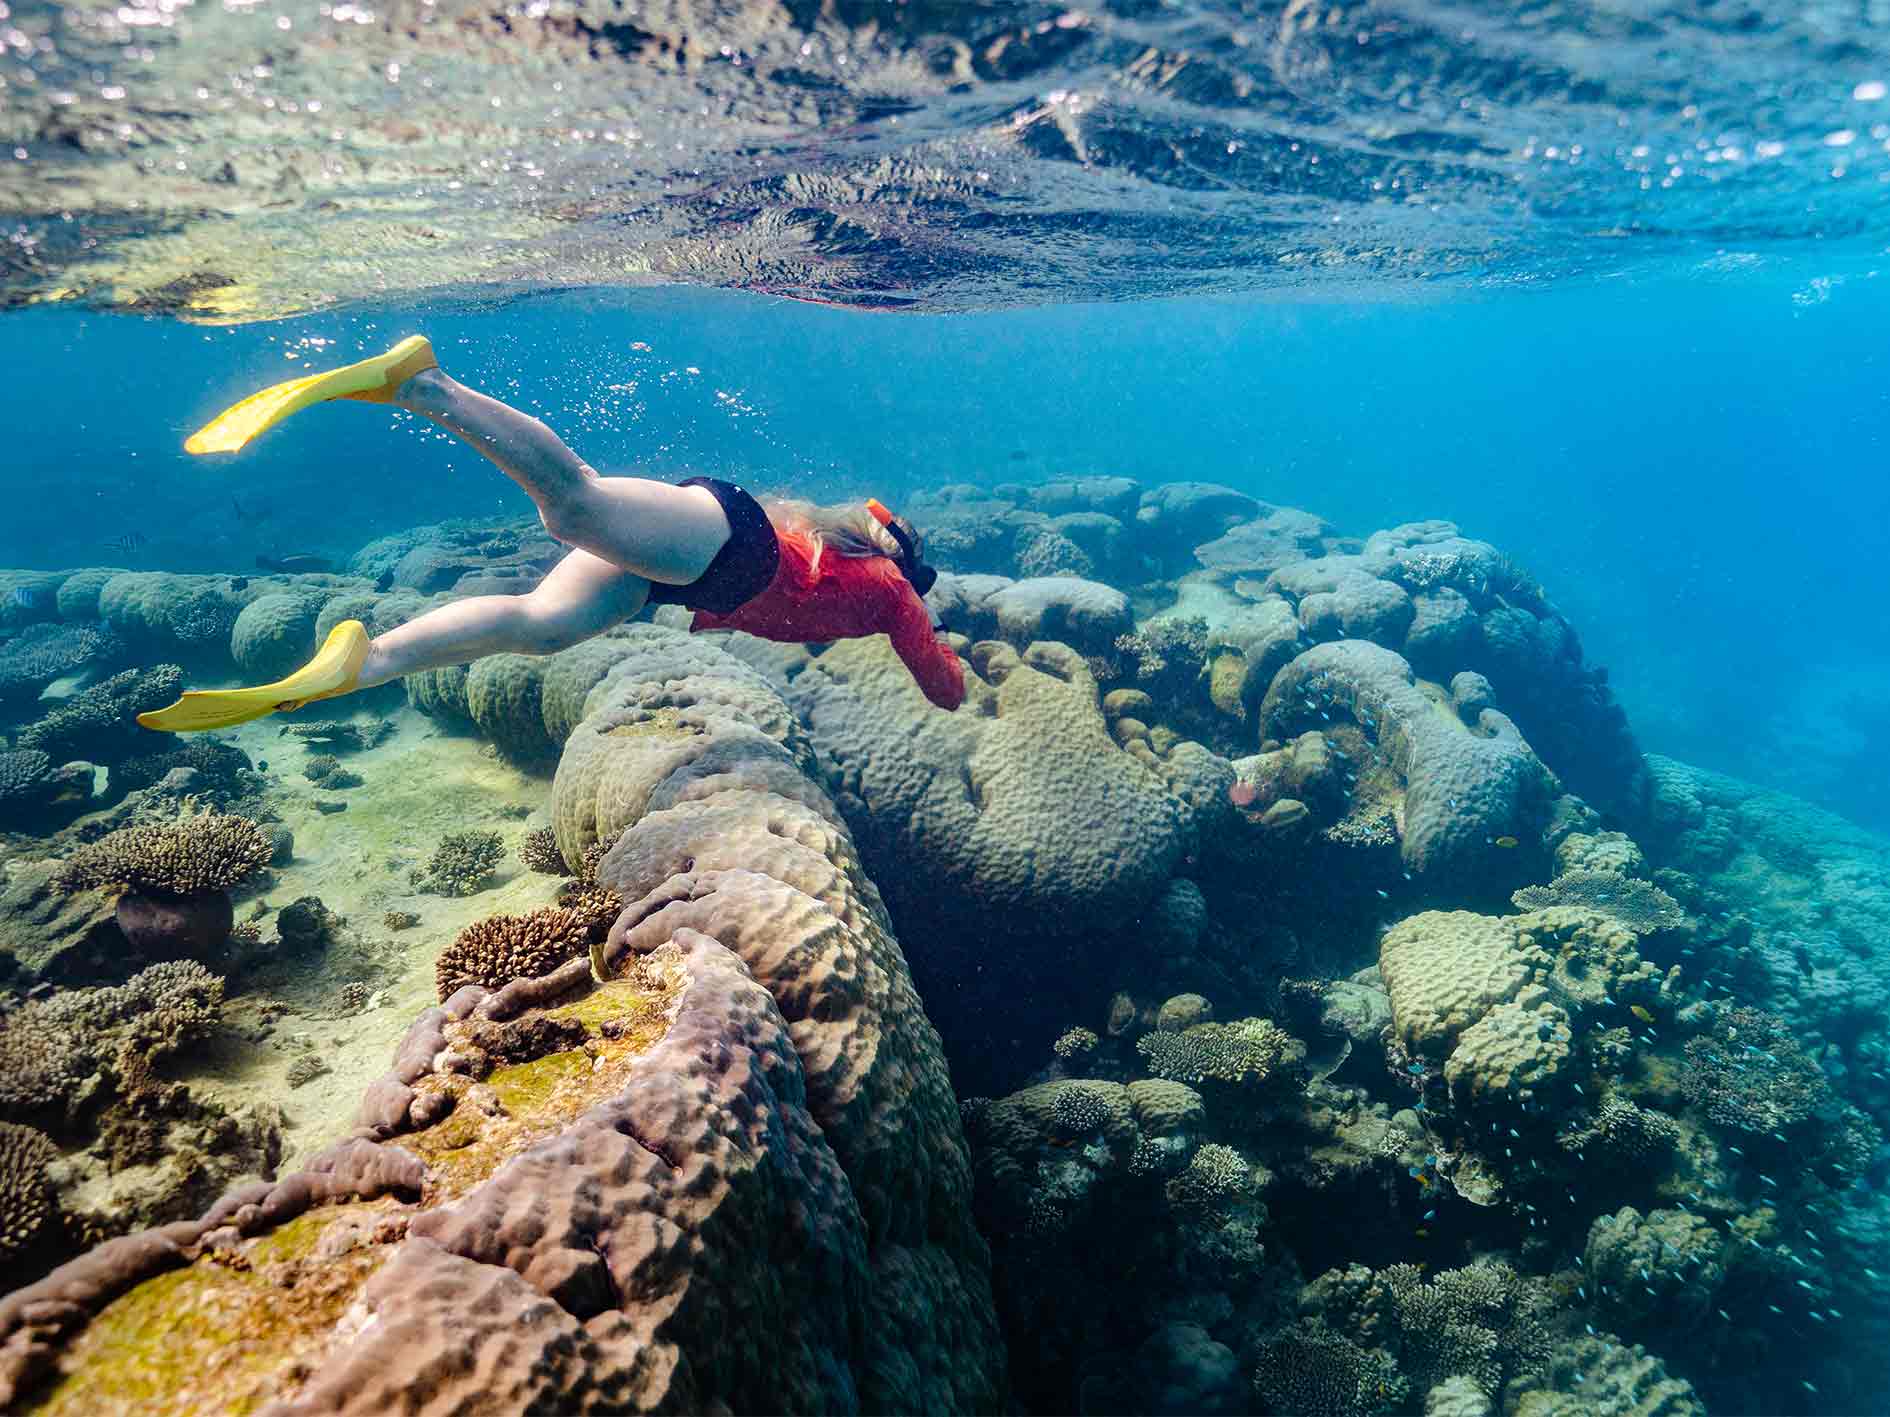 Lady snorkelling underwater with beautiful corals